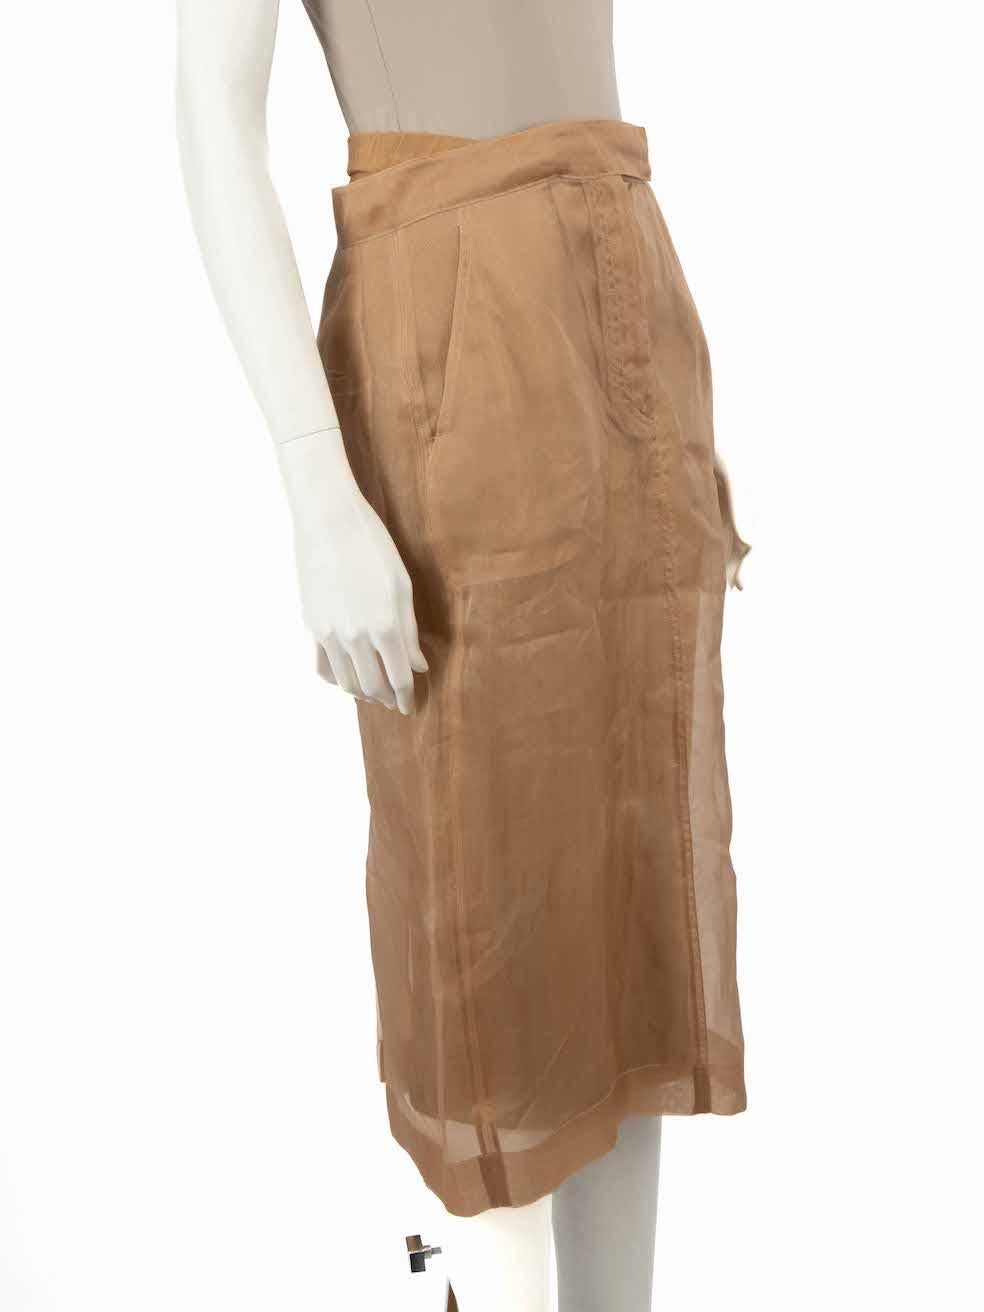 CONDITION is Very good. Minimal wear to skirt is evident. Care label has been removed on this used Max Mara designer resale item.
 
 
 
 Details
 
 
 Beige
 
 Silk
 
 Pencil skirt
 
 Midi
 
 Sheer overlay
 
 Jersey under skirt
 
 Fly zip, hook and